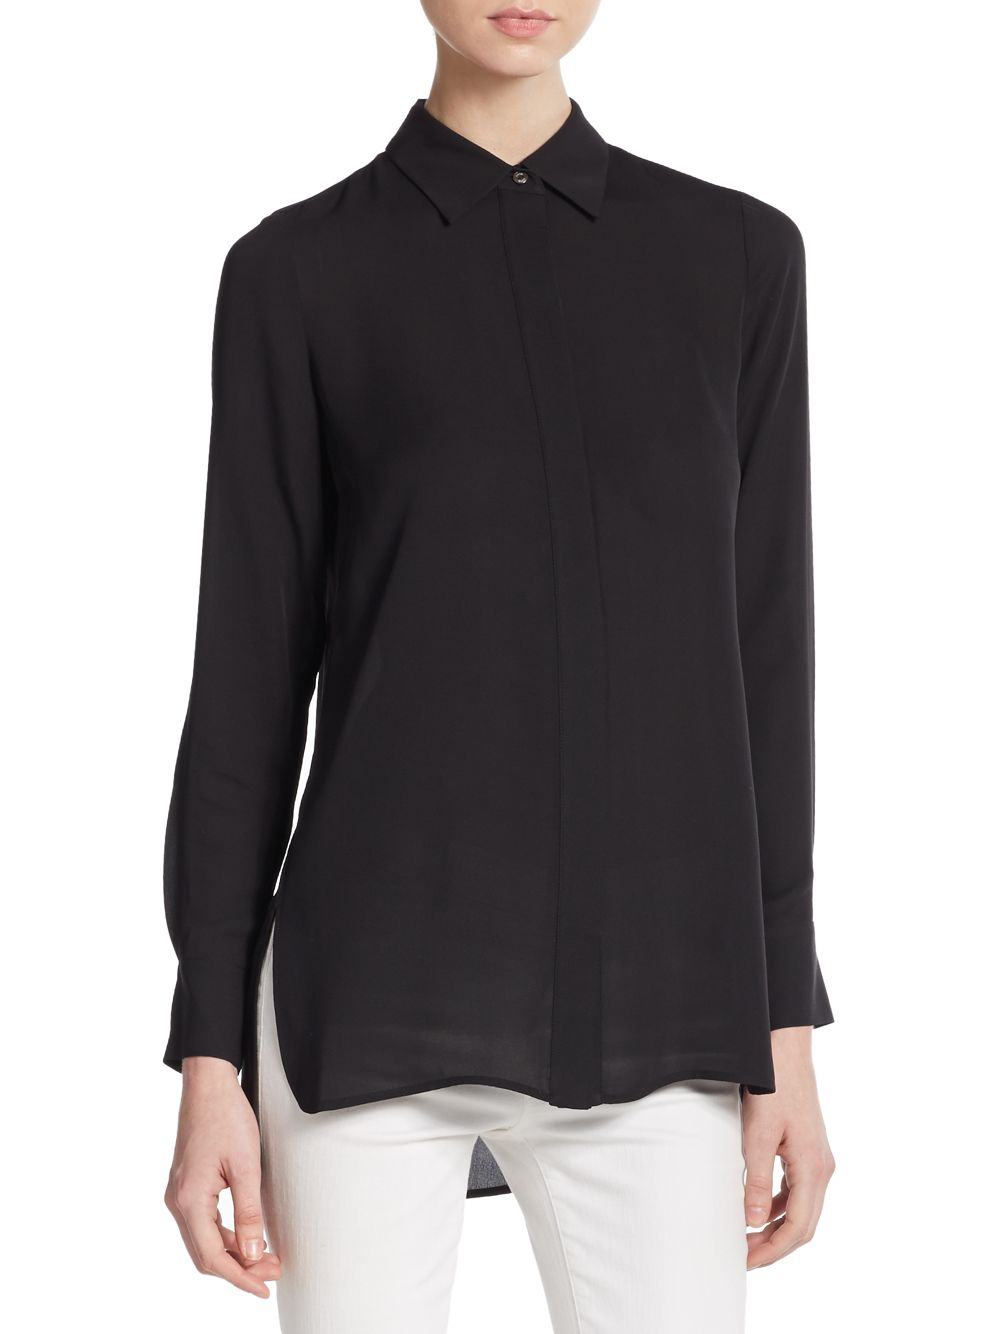 Lyst - Vince Silk Button-front Blouse in Black